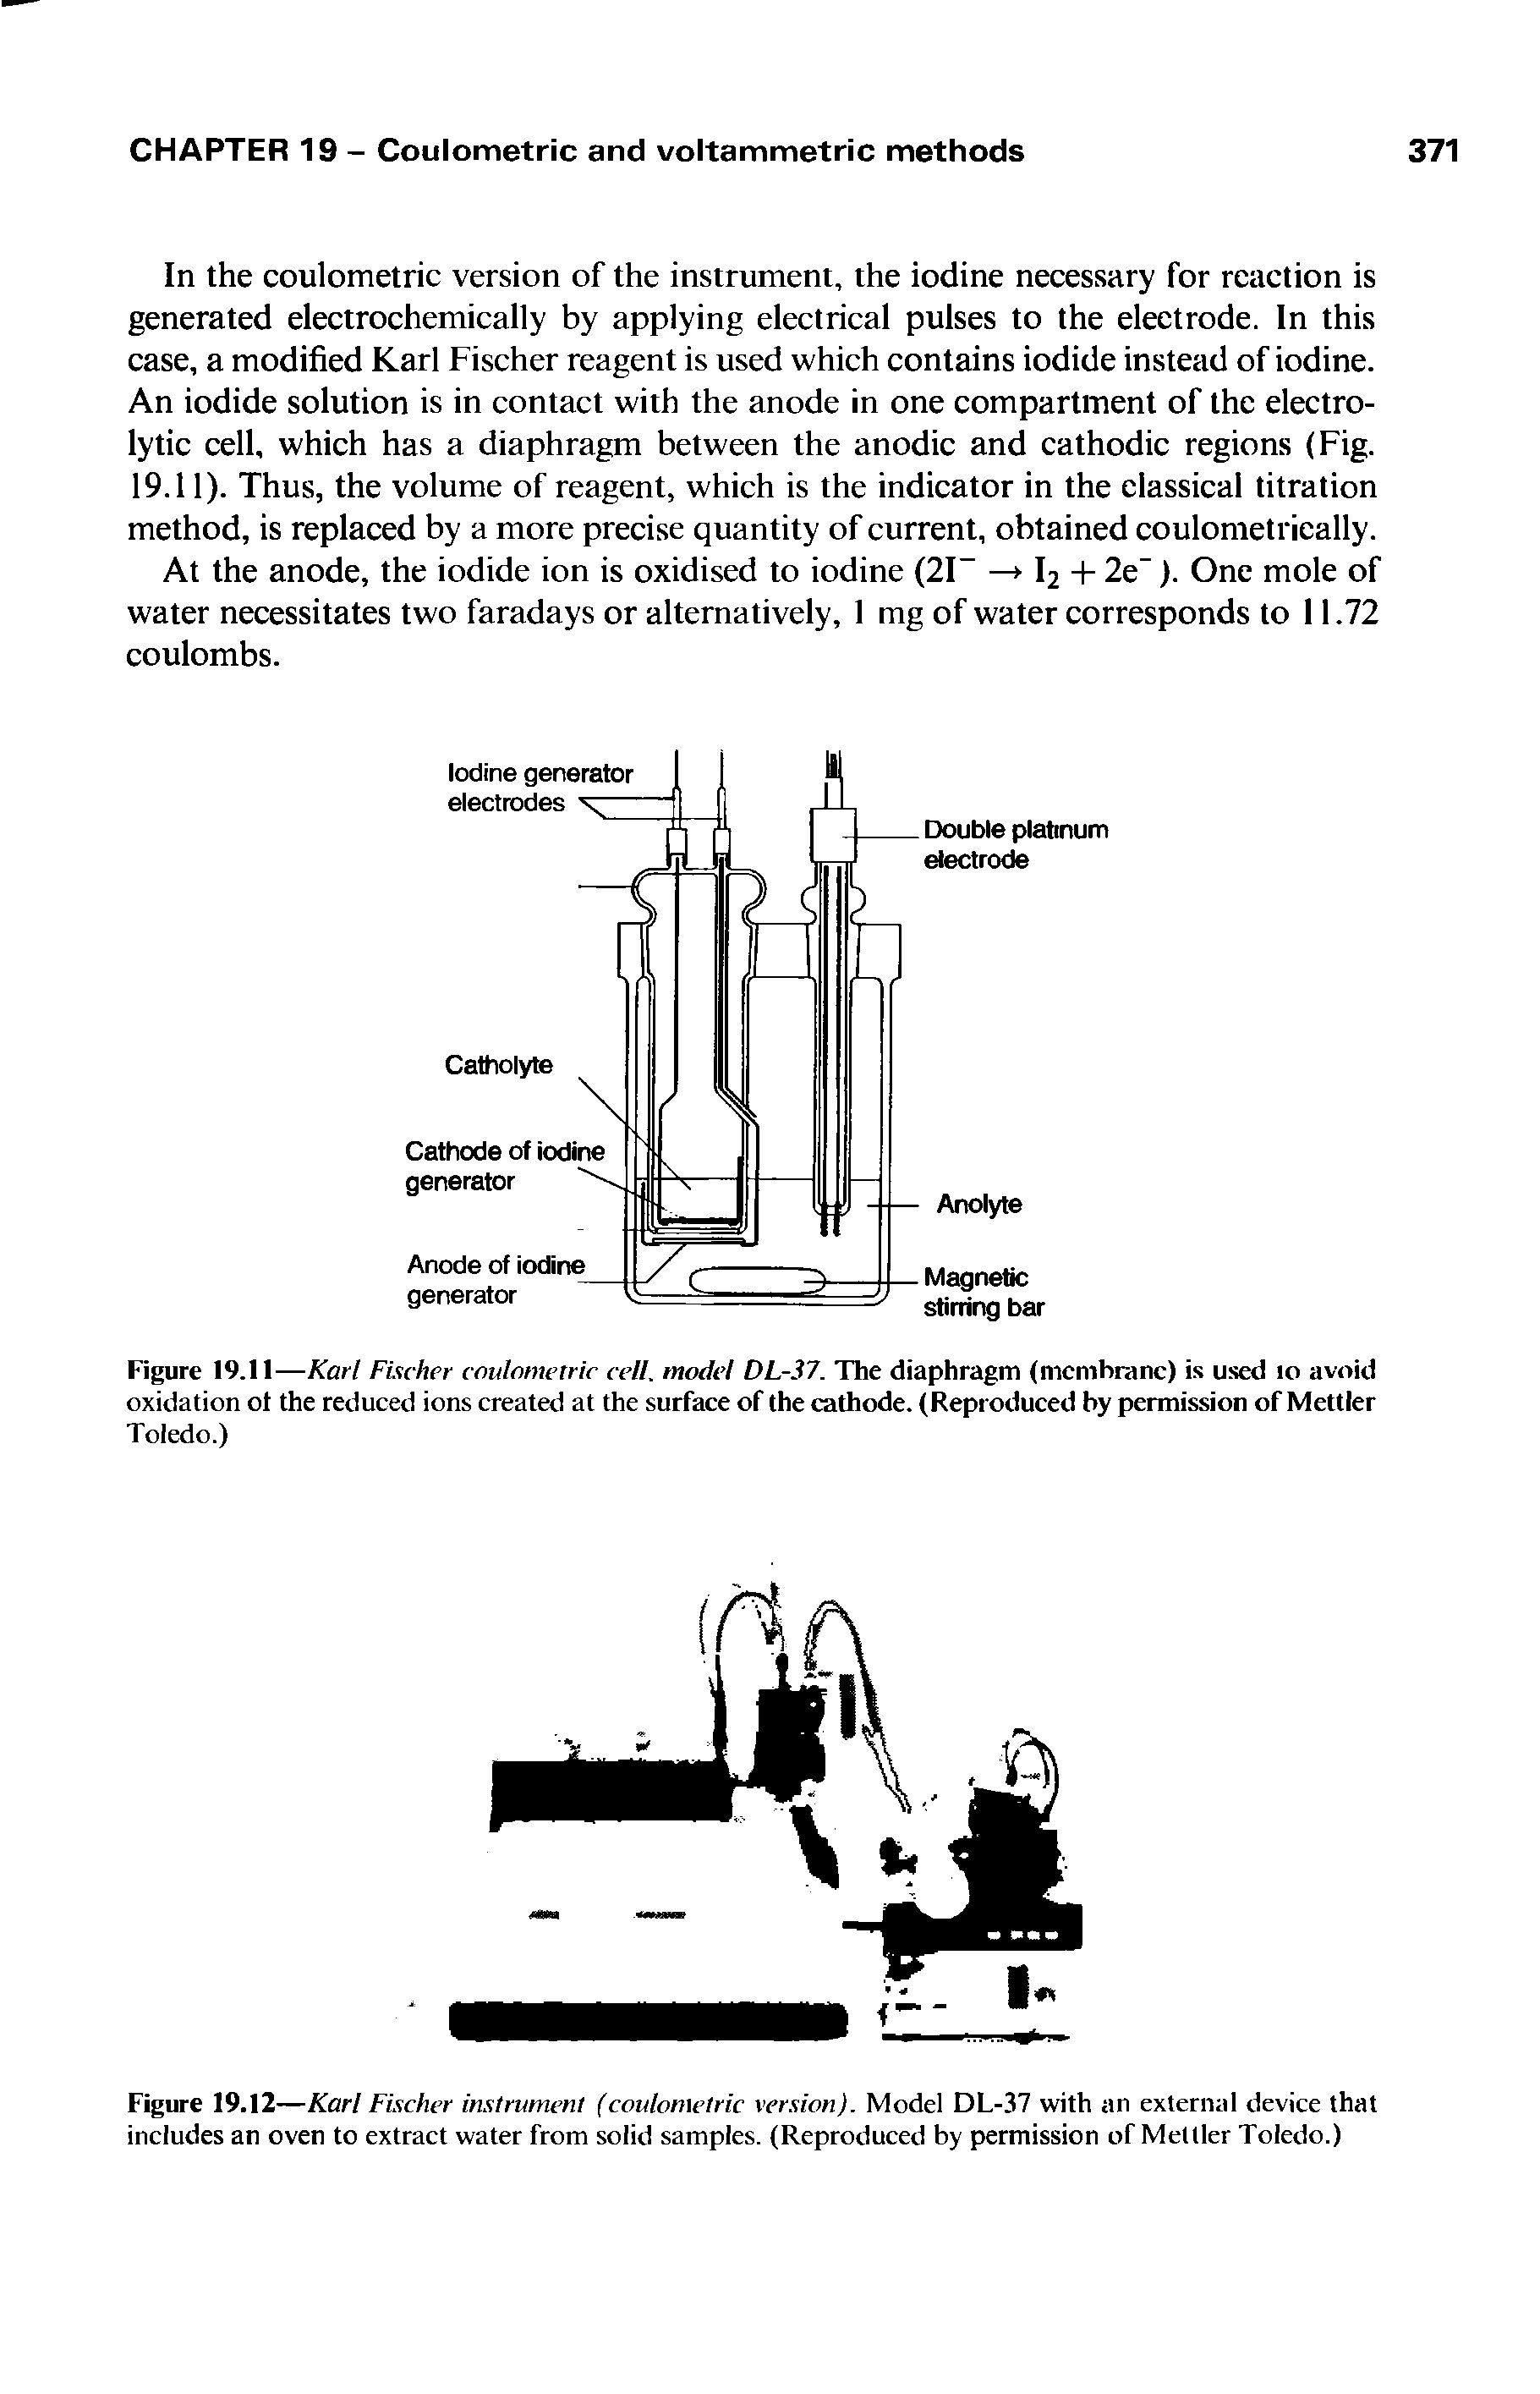 Figure 19.12—Karl Fischer instrument (coulometric version). Model DL-37 with an external device that includes an oven to extract water from solid samples. (Reproduced by permission of Mettler Toledo.)...